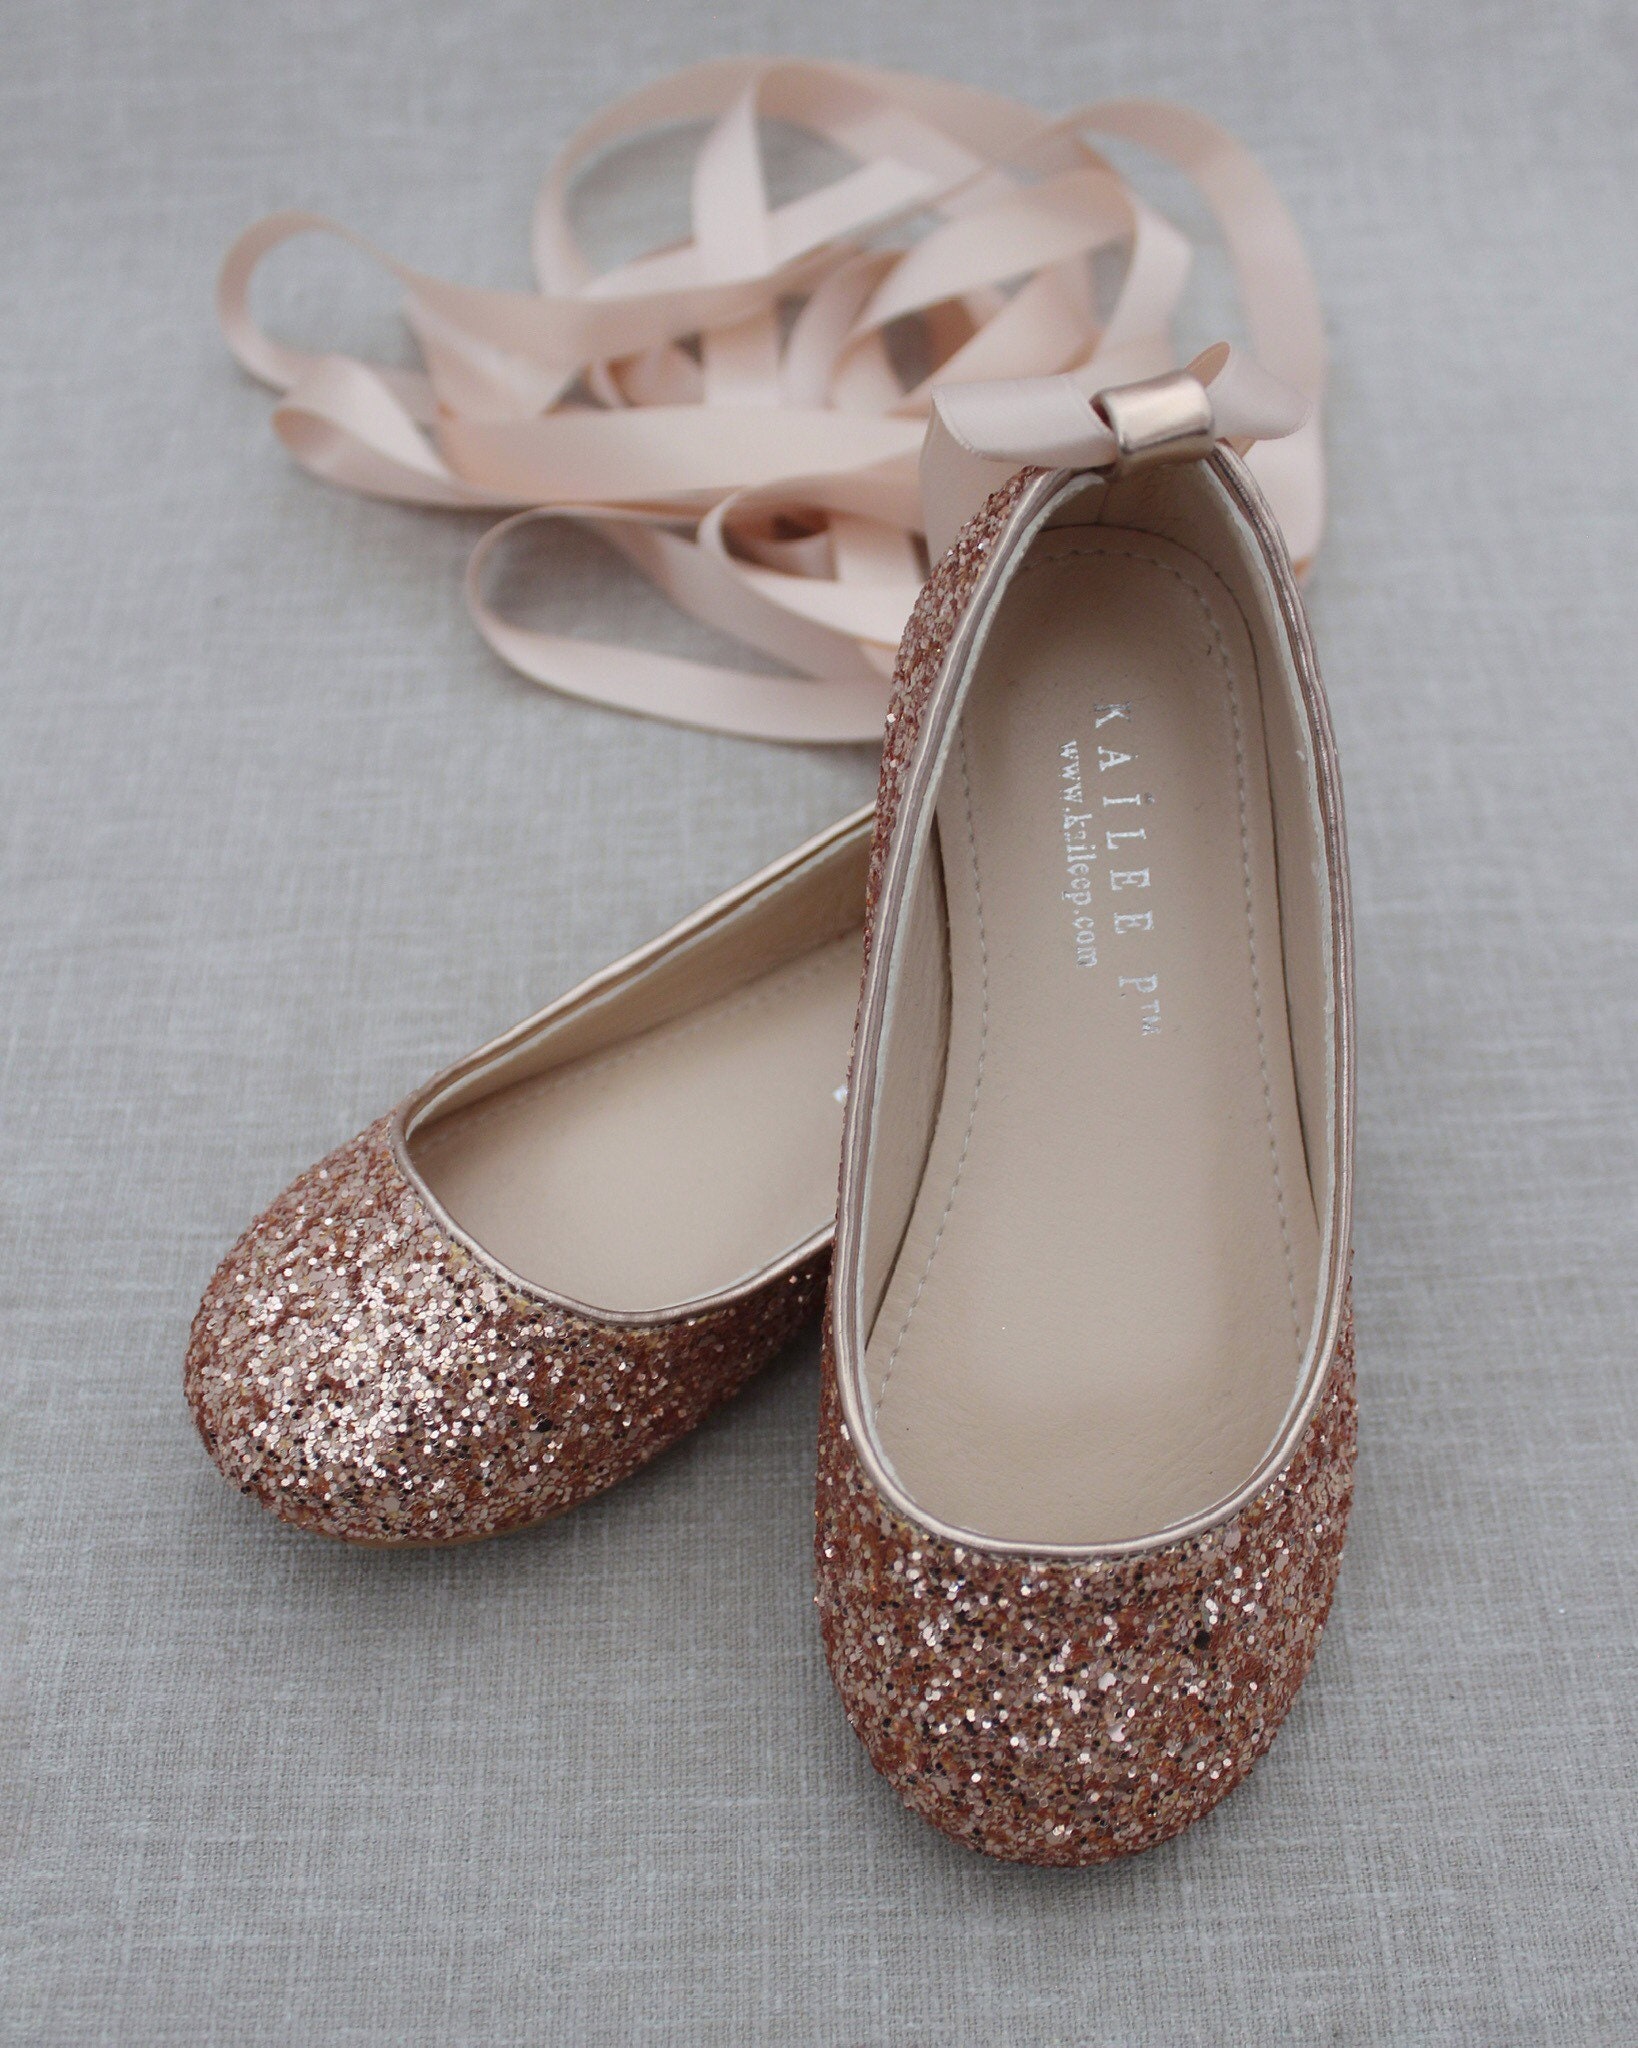 ROSE GOLD rock glitter ballet flats with Satin Ankle Tie or | Etsy